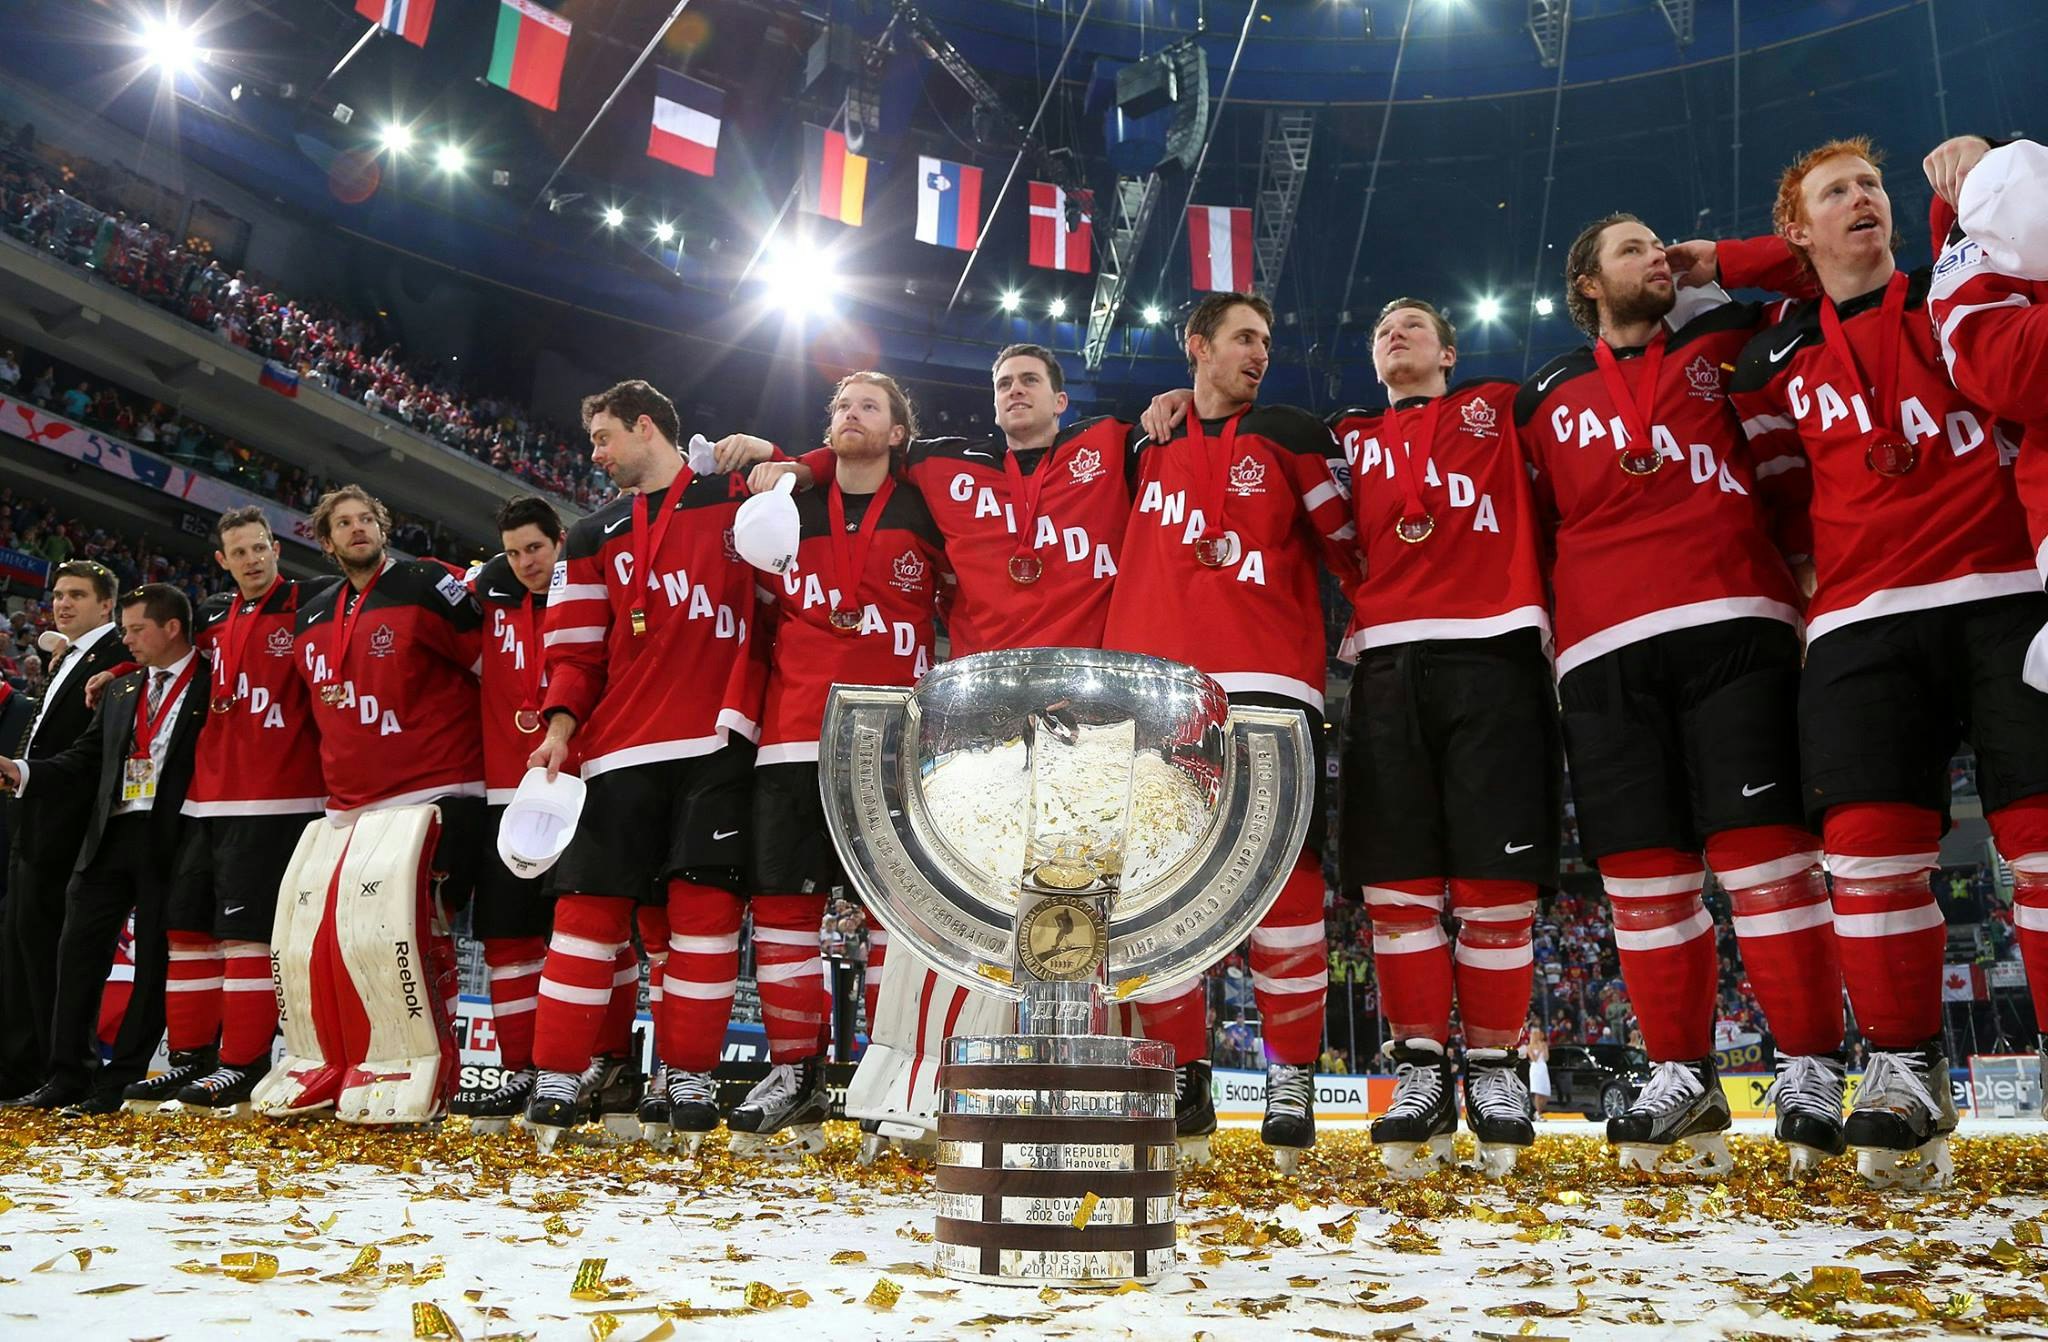 TSN and RDS Announce Multi-Year Media Rights Extension for IIHF ICE HOCKEY WORLD CHAMPIONSHIP